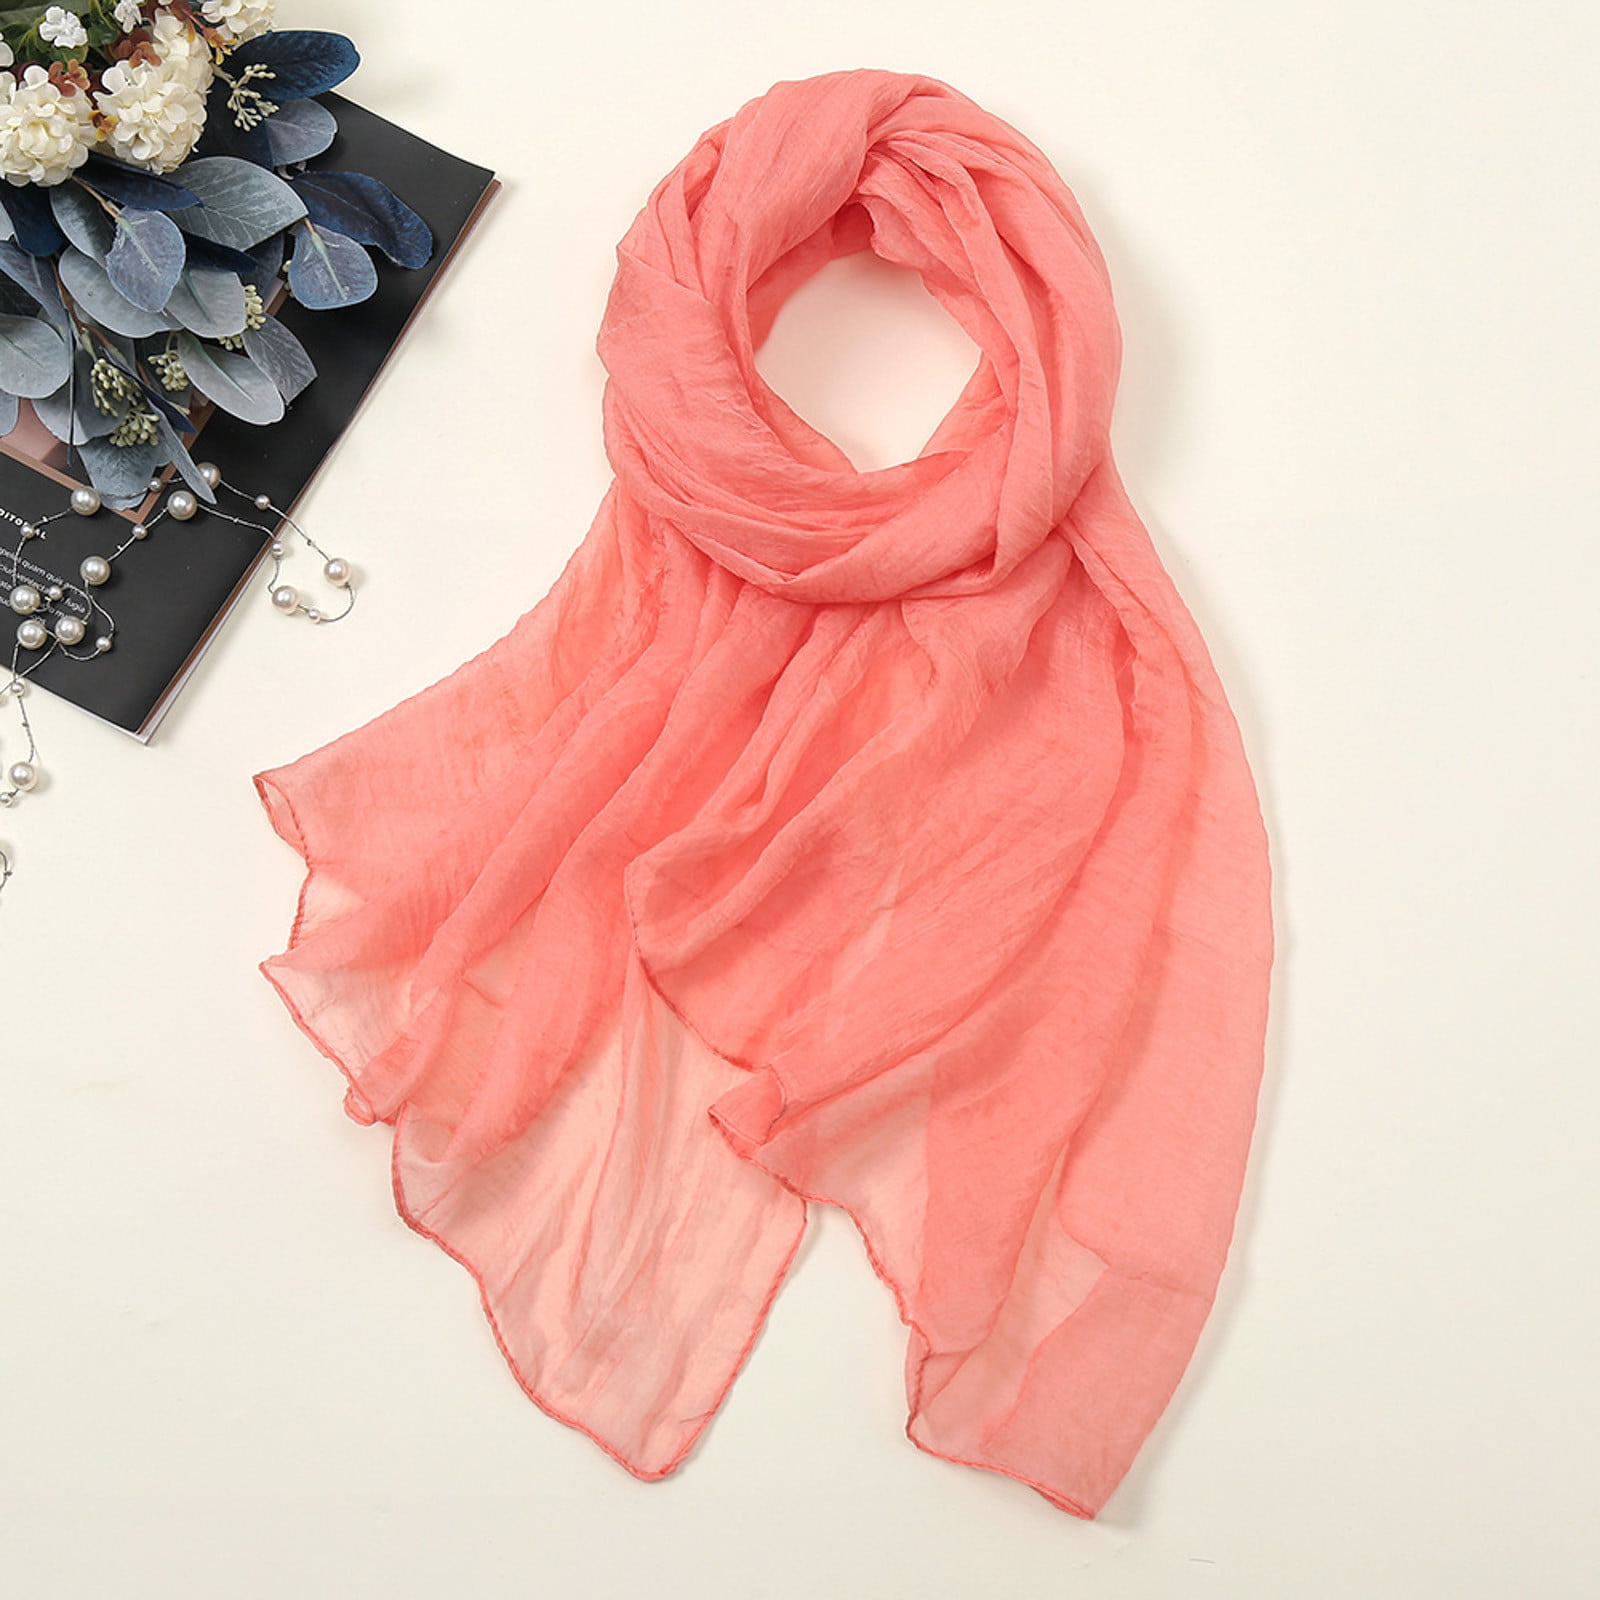 Rovga Beautiful Scarfs For Women Ladies Summer Casual Colorful